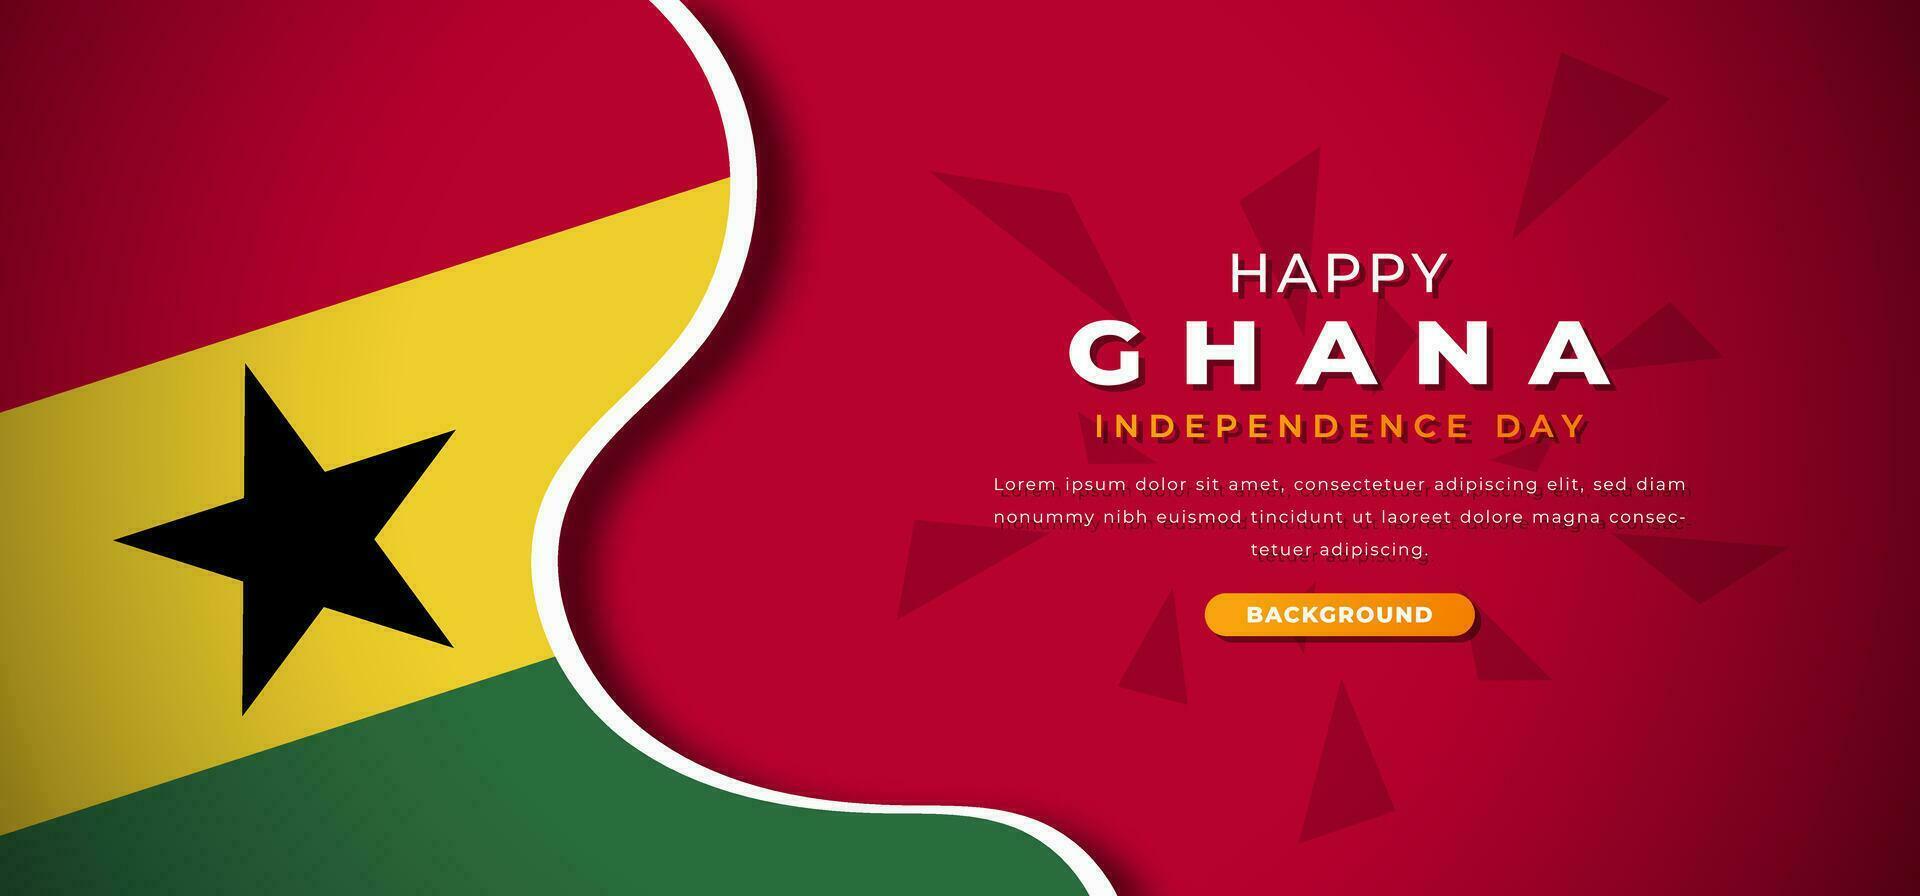 Happy Ghana Independence Day Design Paper Cut Shapes Background Illustration for Poster, Banner, Advertising, Greeting Card vector